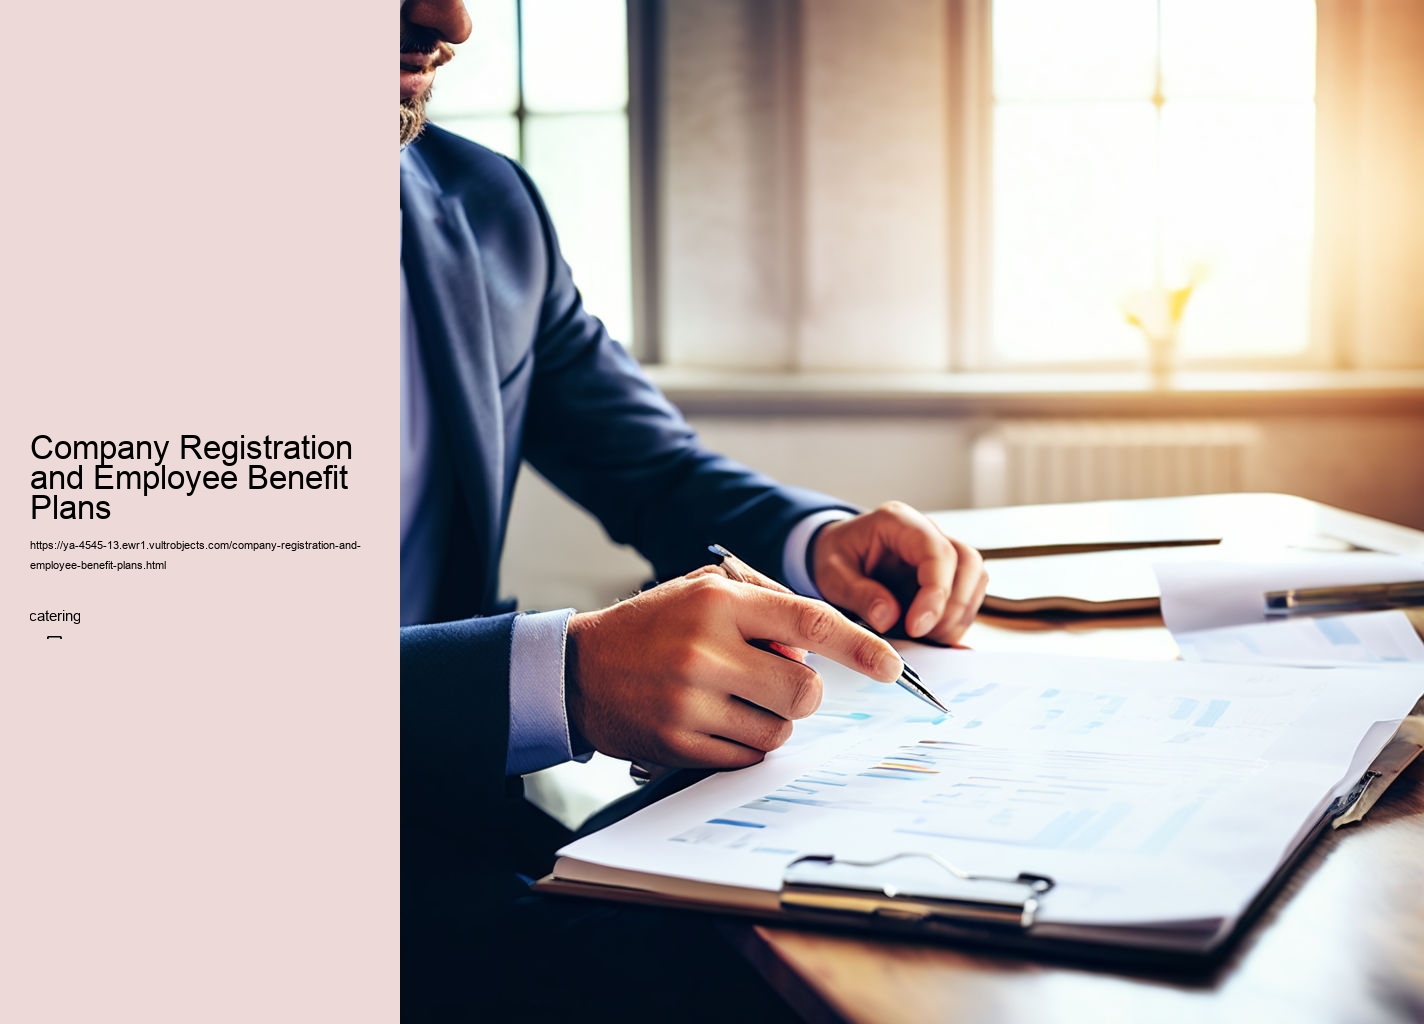 Company Registration and Employee Benefit Plans